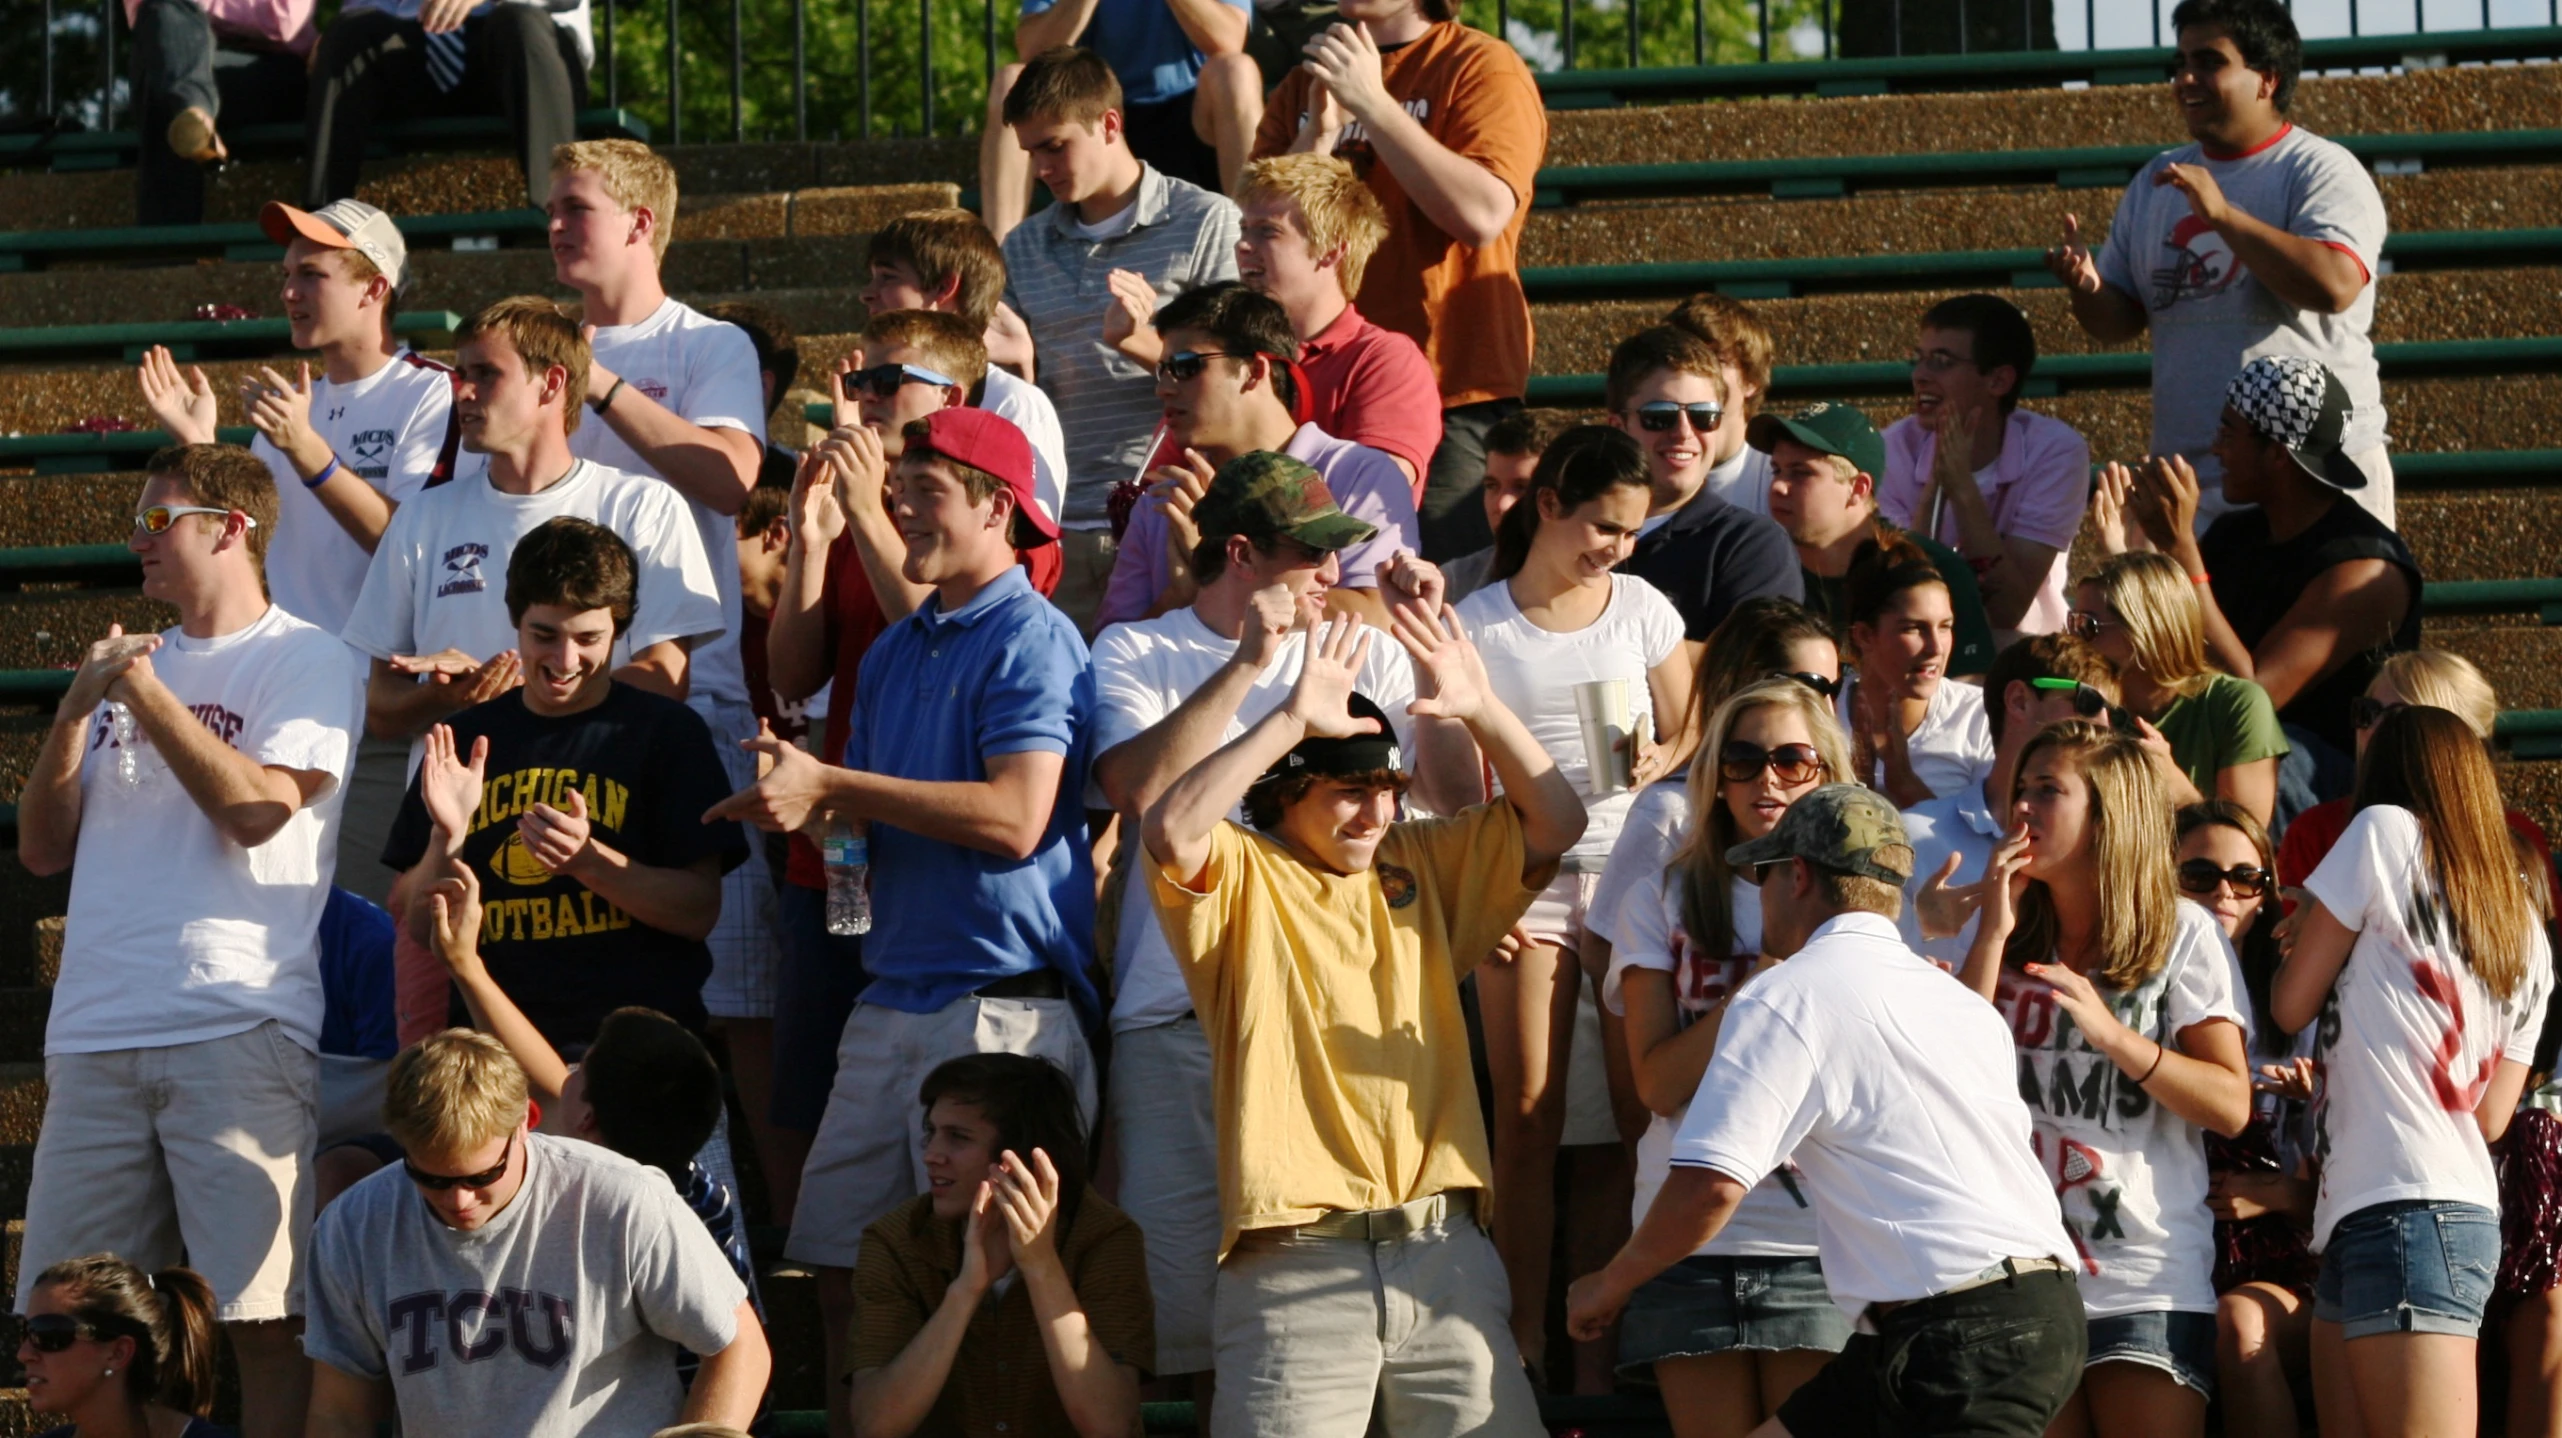 group of people with their hands up standing in front of a bleachers watching